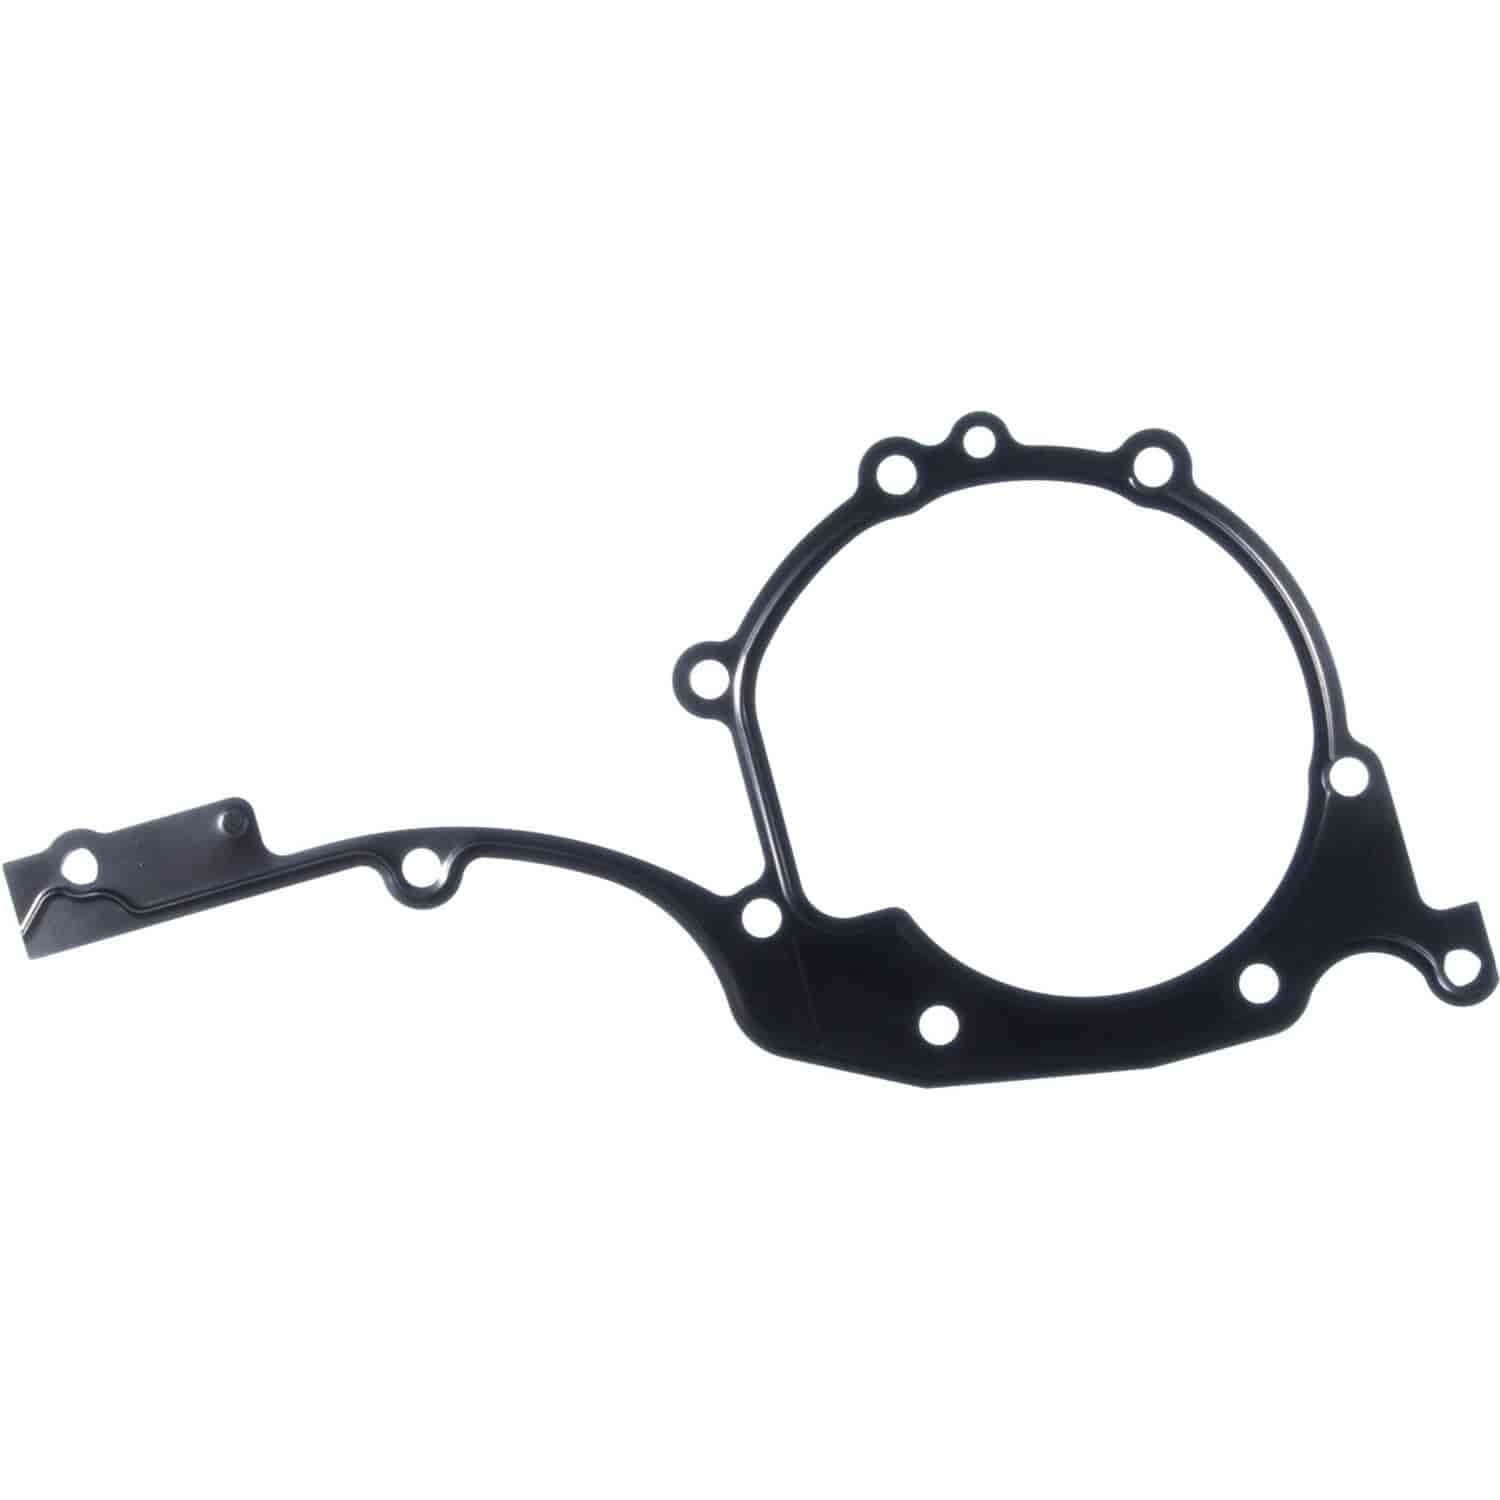 Timing Cover Lower BMW 2.5L. 2.8L 3.2L 1996-2000 LOWER LEFT